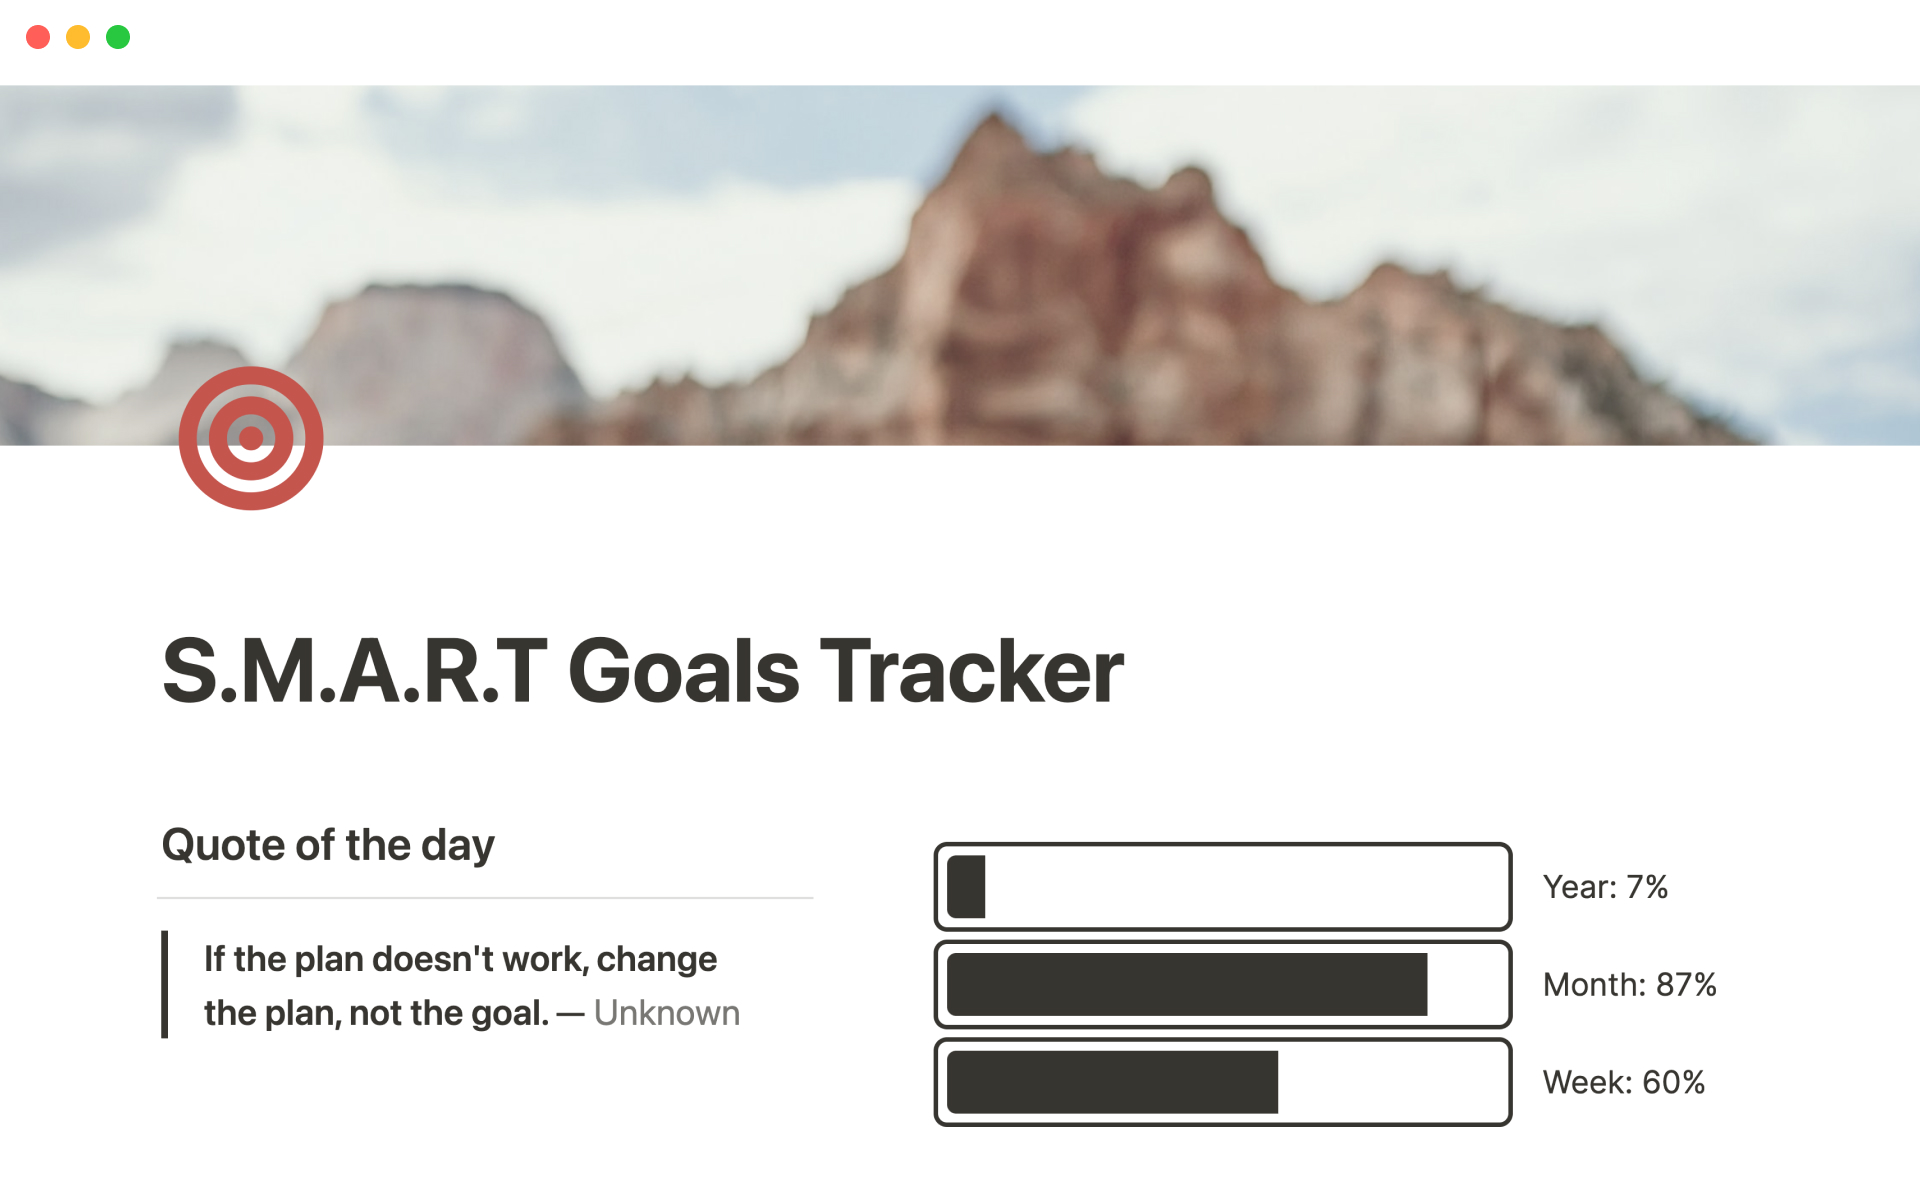 In-depth goal setting and tracking, inspired by Ali Abdaal.